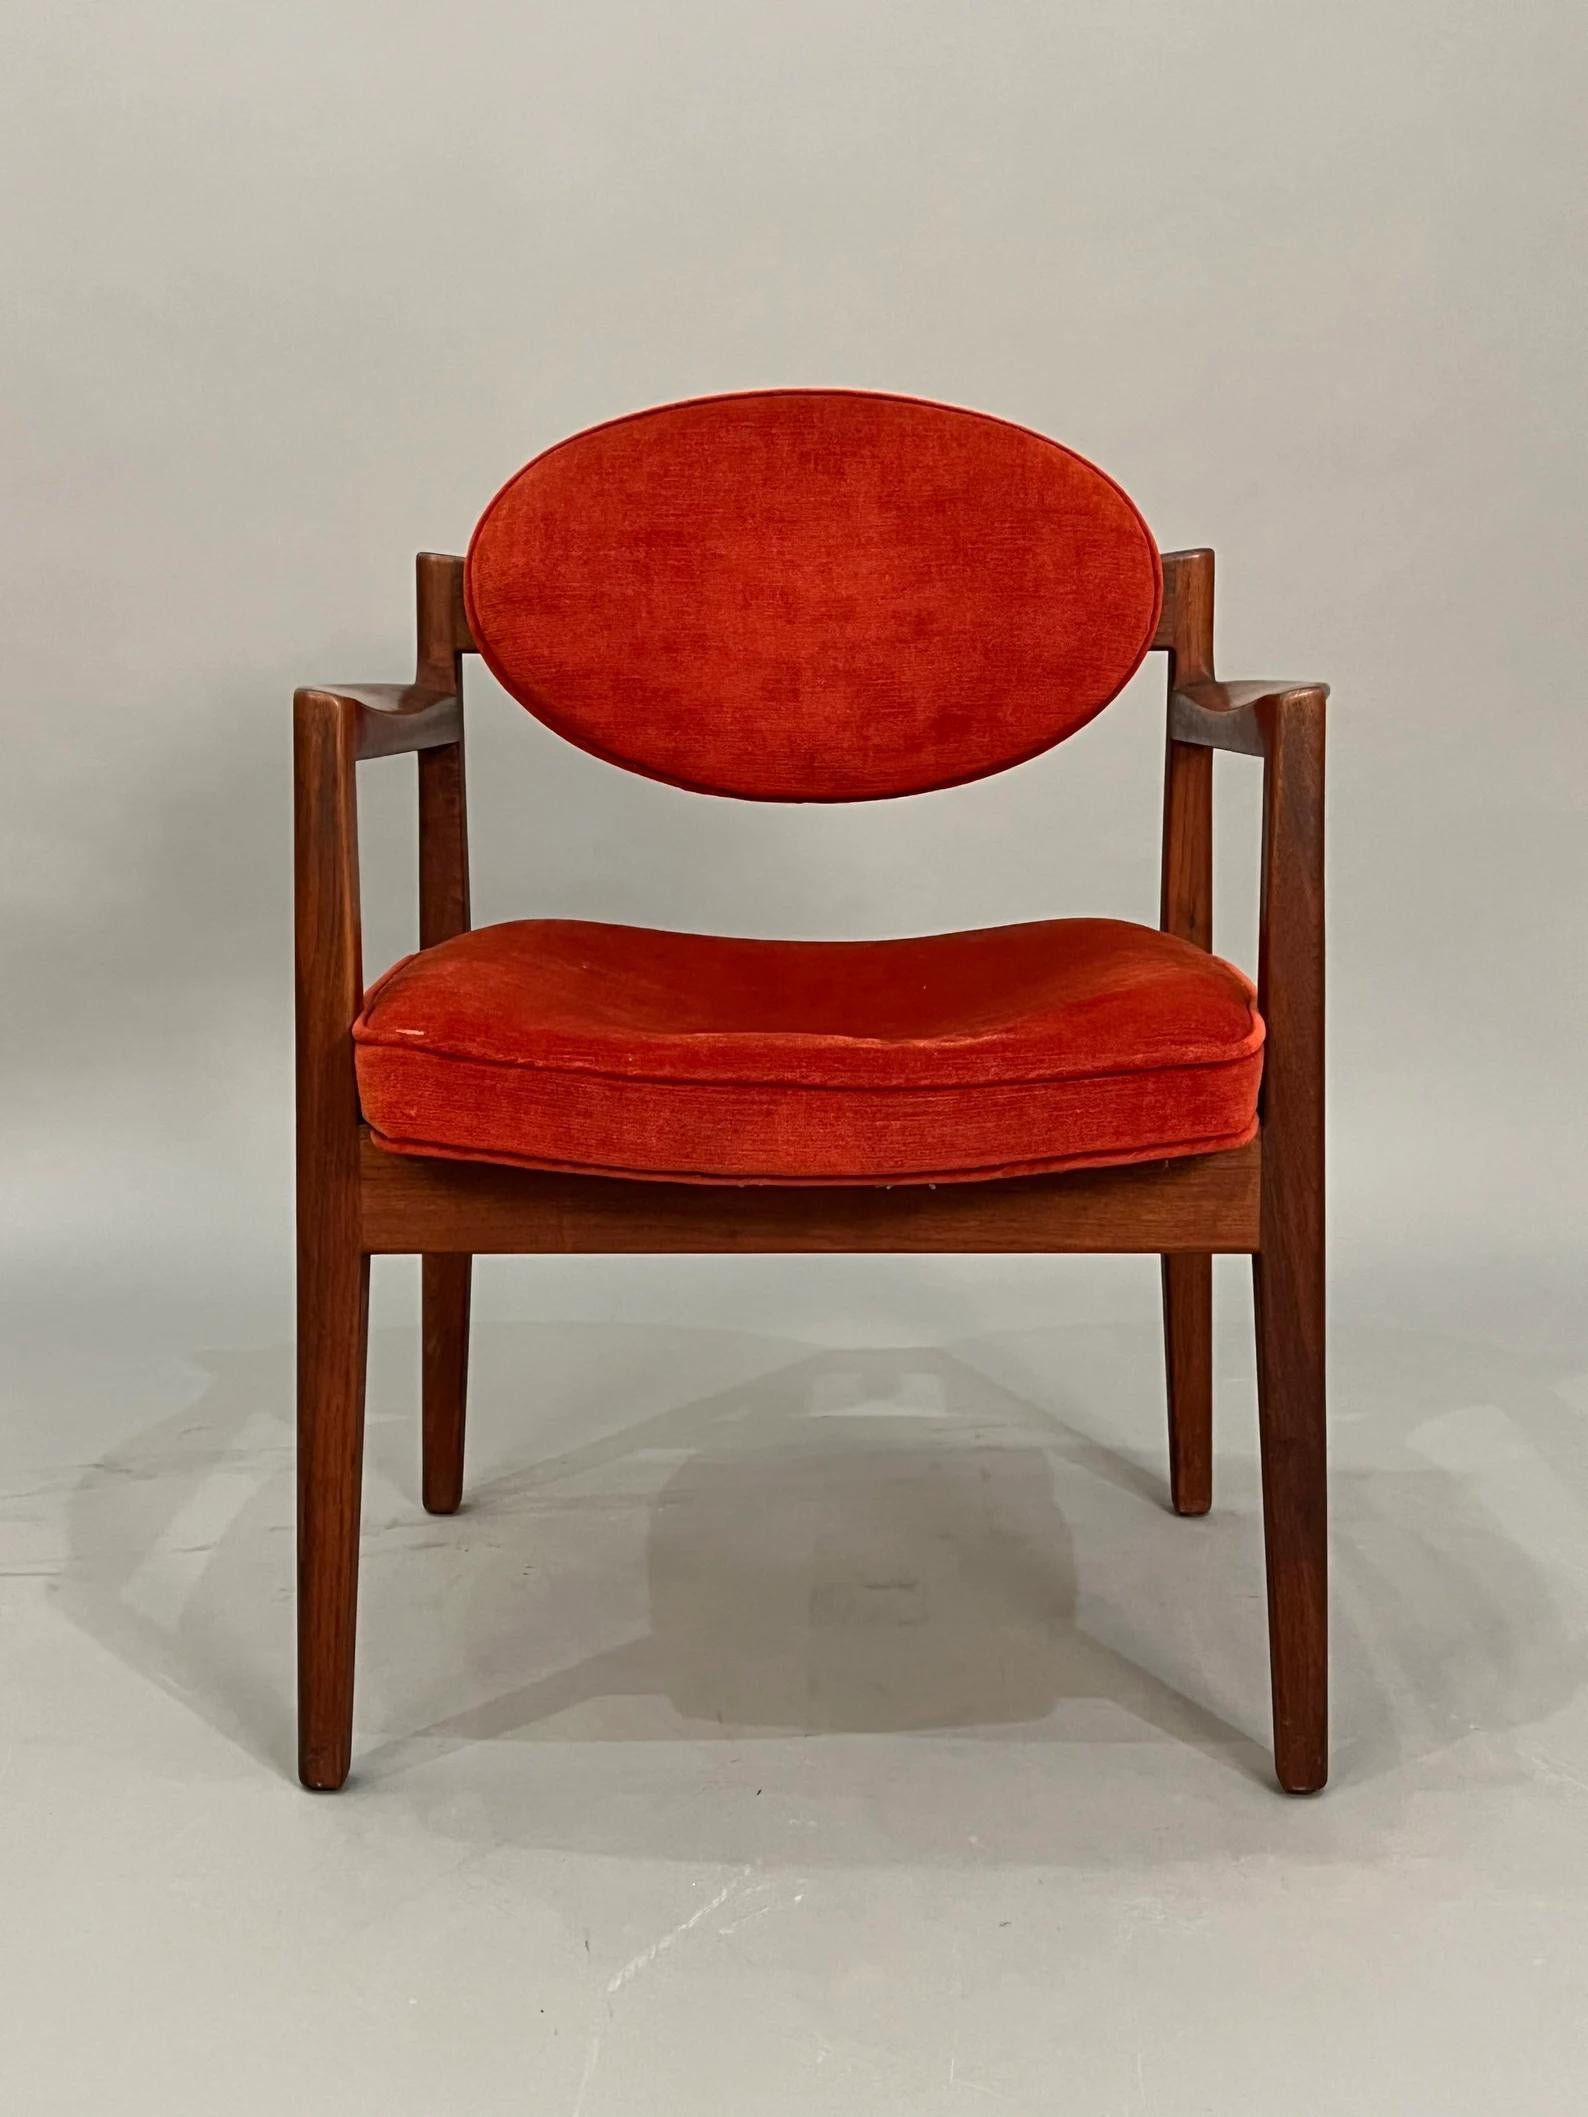 Mid-20th Century Midcentury, Jens Risom Office / Dining Chair Original Upholstery 1960s